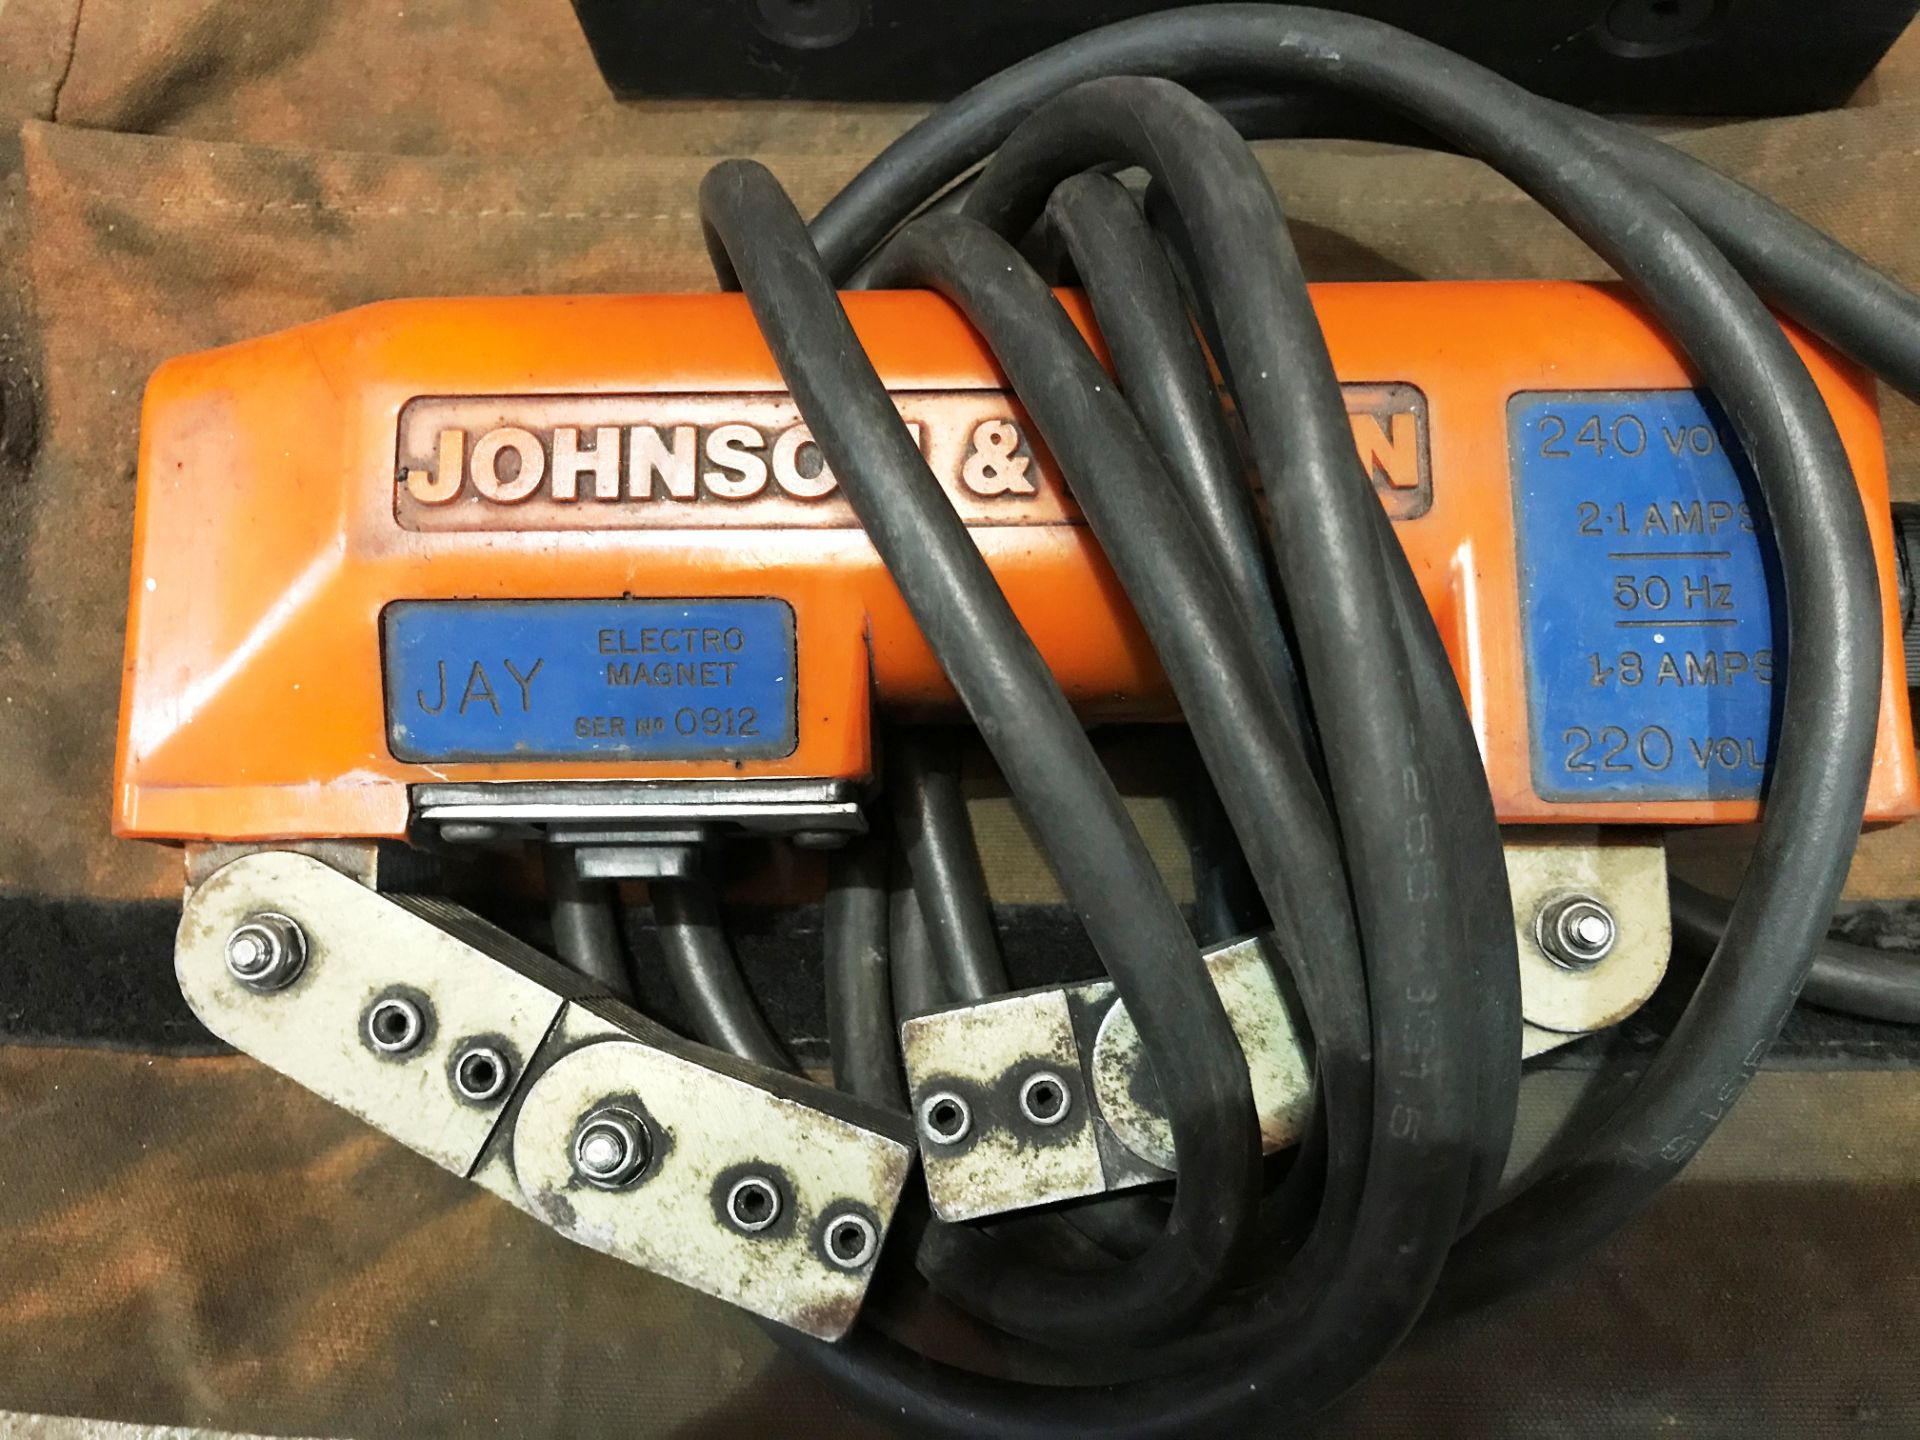 Johnson & Allen JAY Magnetic Particle Inspection Yoke w/ Test Weight - Image 2 of 3